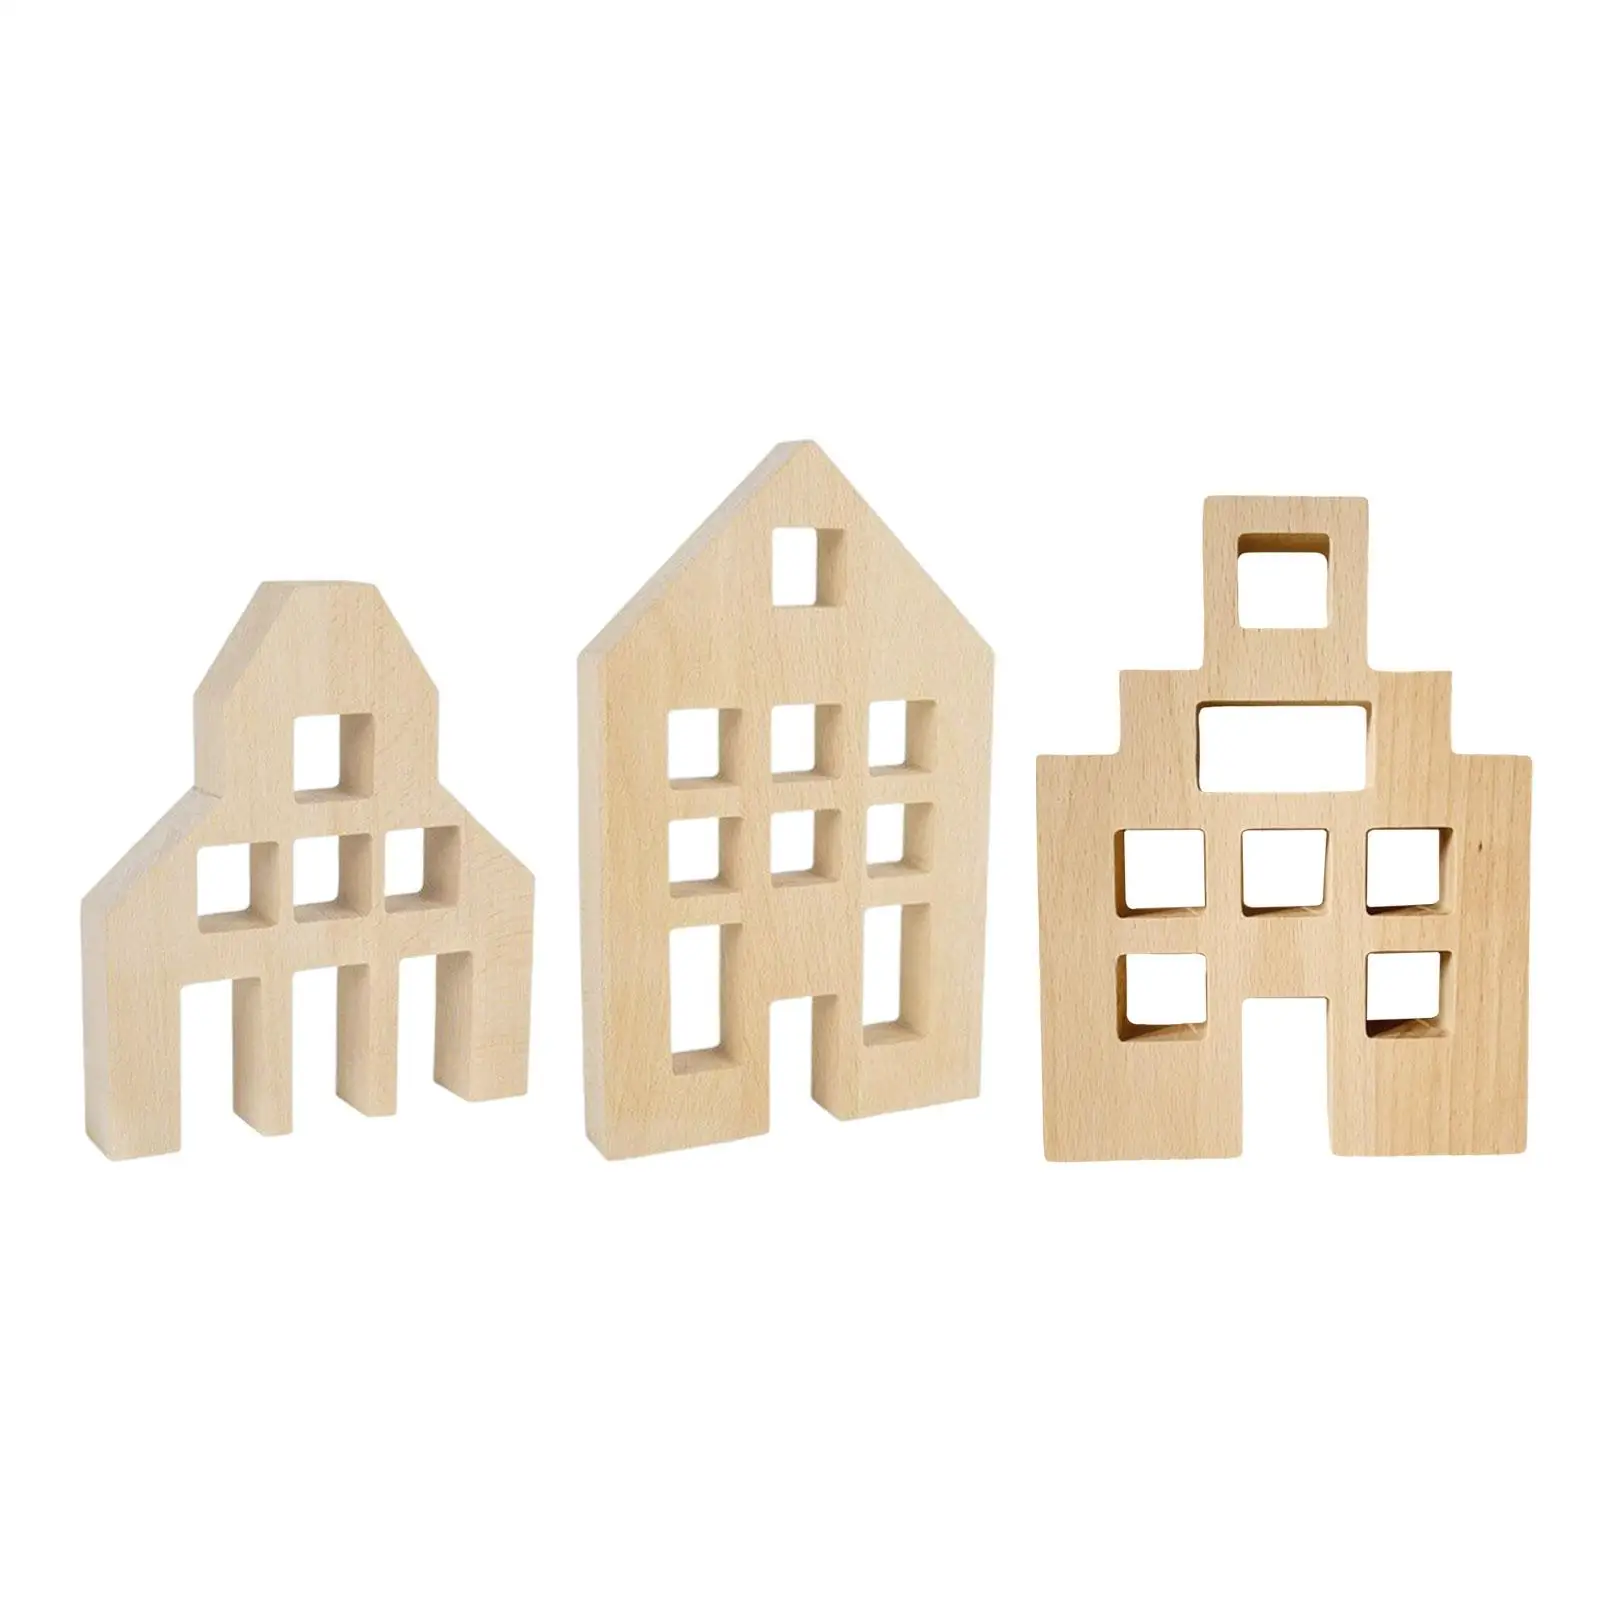 3x Wood House Blocks Crafts Centerpiece Ornament for Ages 3-6 Kids Party Favors Boys Girls